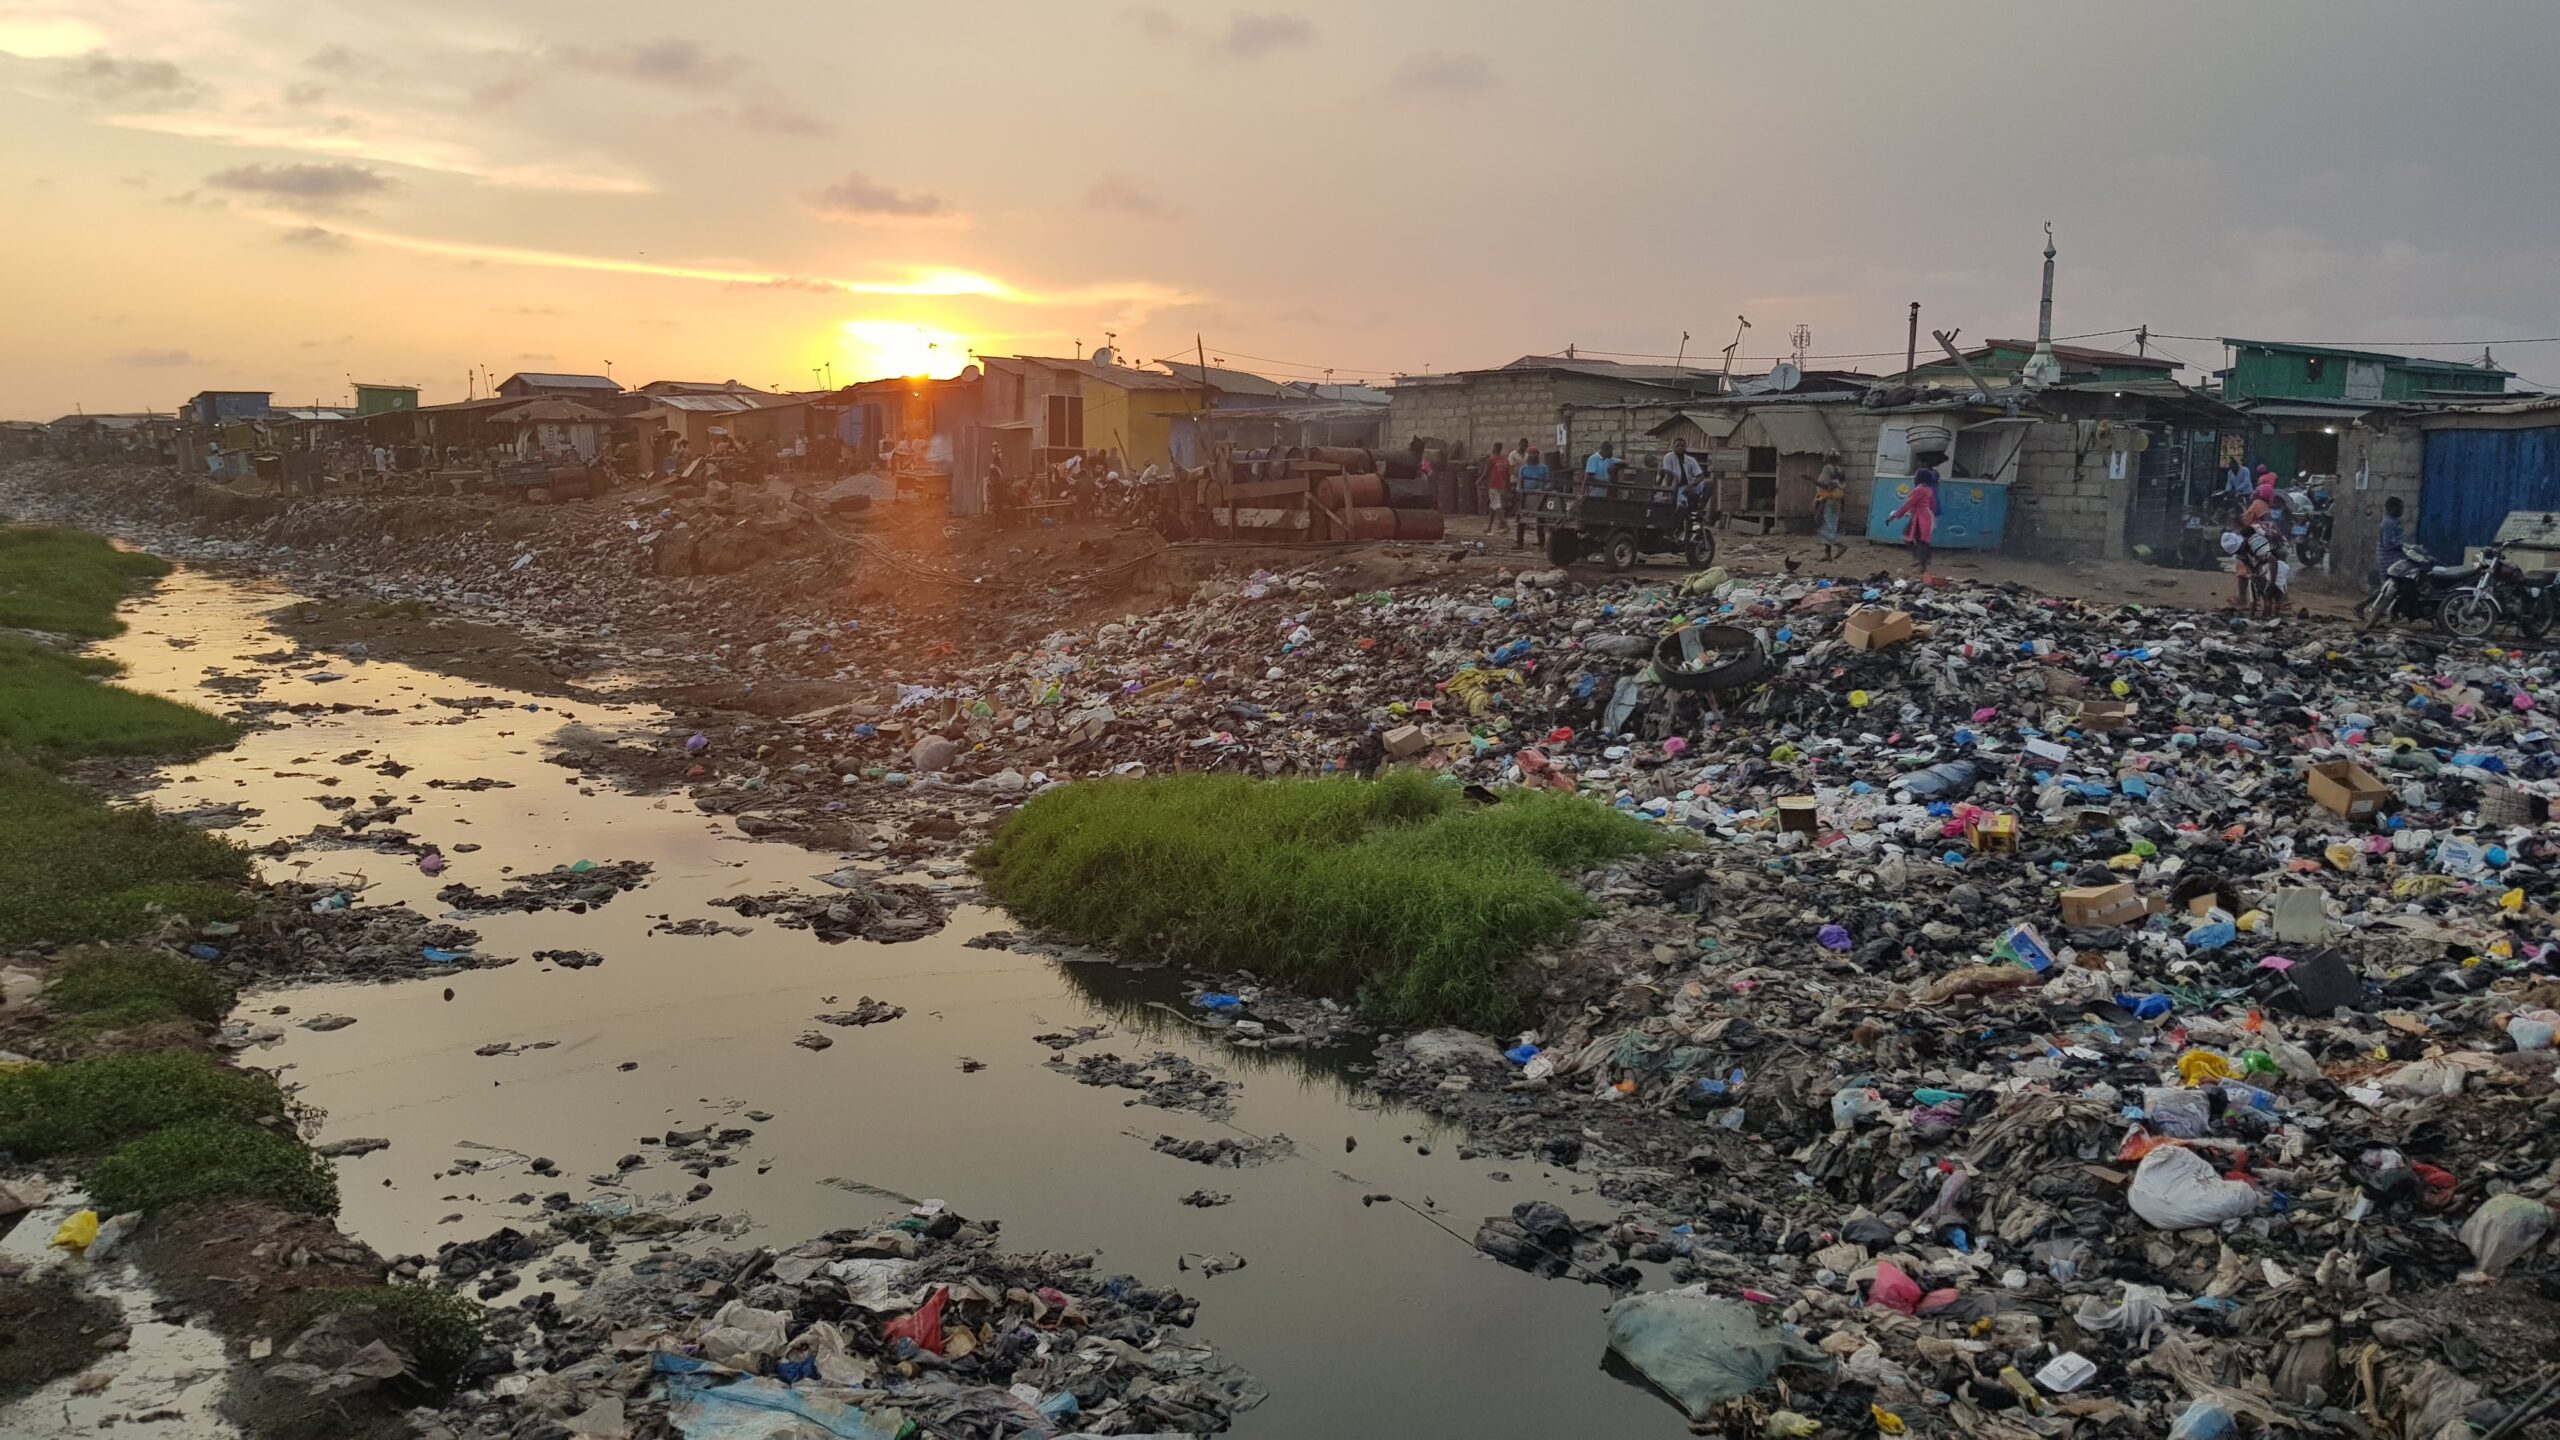 The Plastic REVolution Foundation summarizes learnings in comprehensive End-of-Phase report